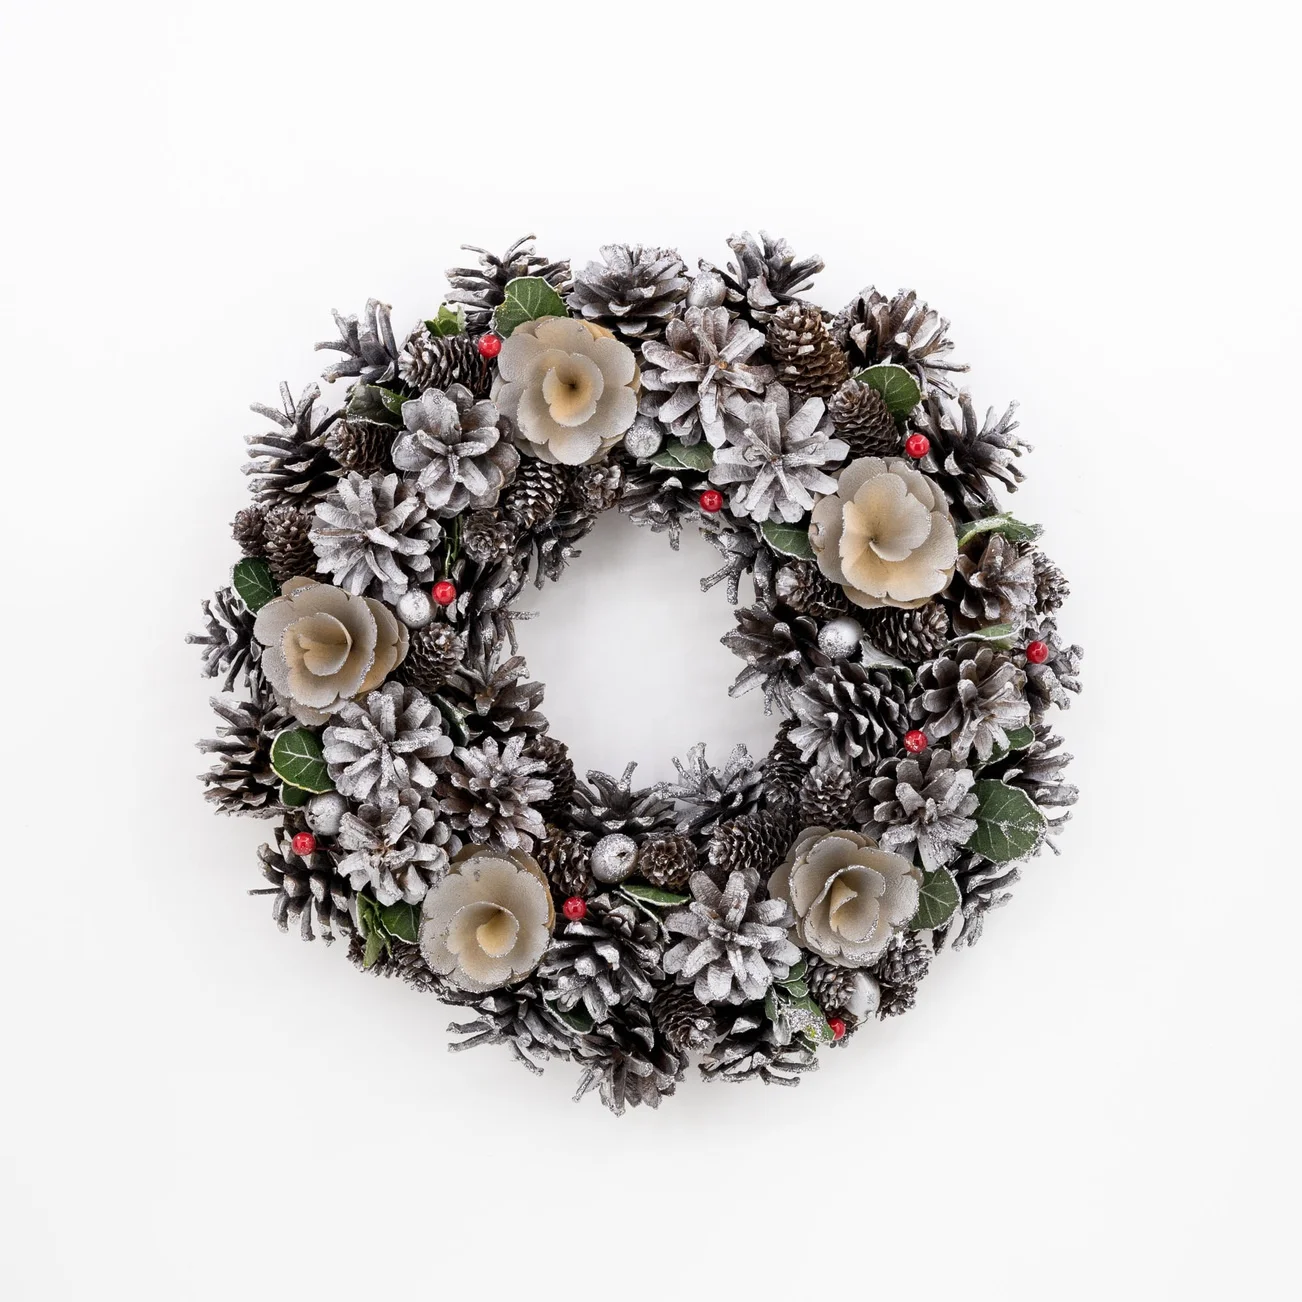 Natural Touch Home Decor Wreath Supplies Wholesale Xmas Pinecone Christmas Wreaths for home decoration